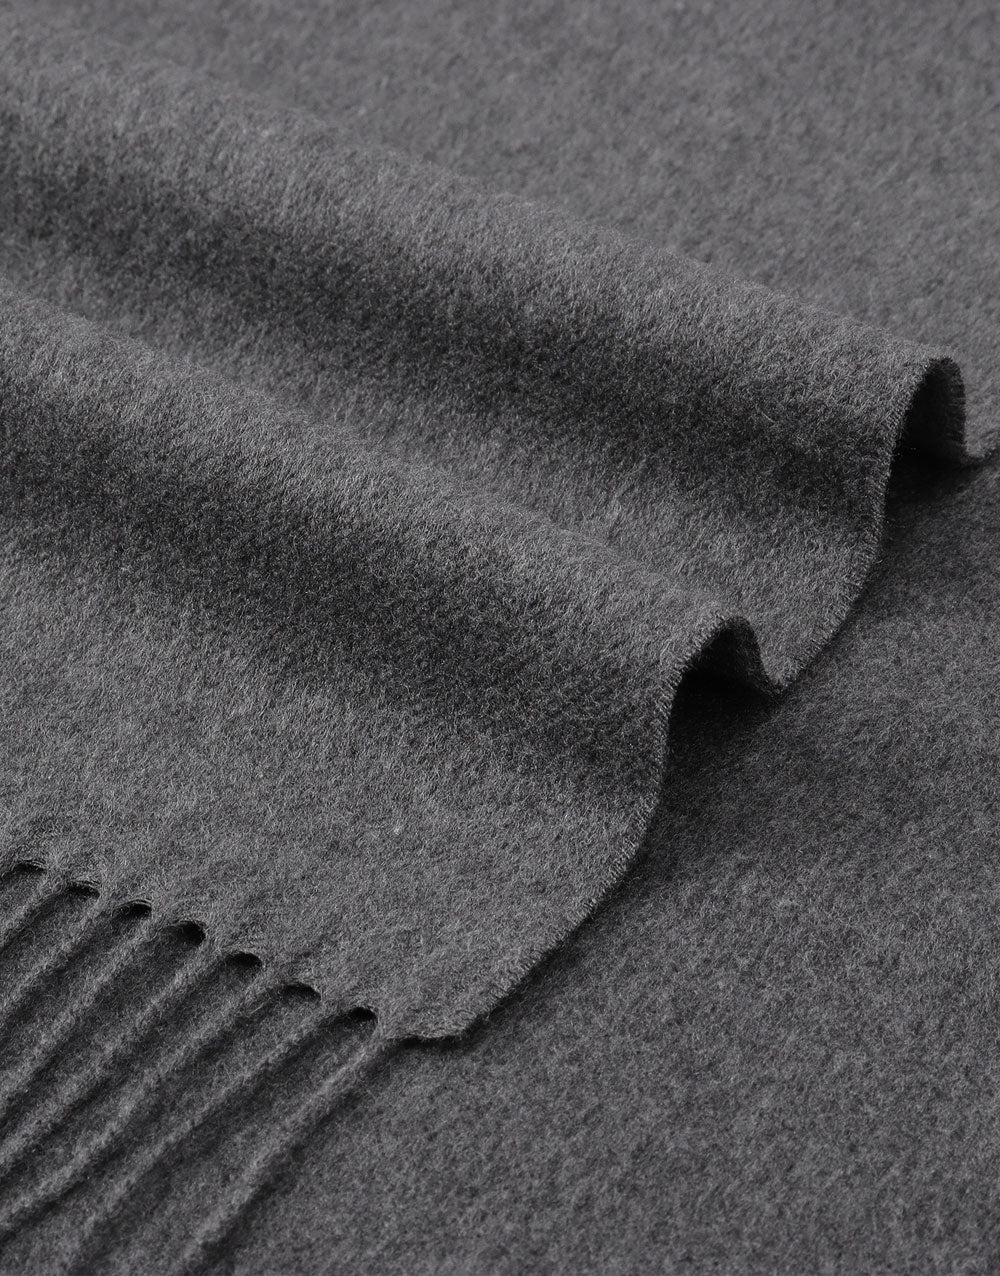 Pre-order sales: <br>100% Silk Stole_Gray<br>to be shipped from early November